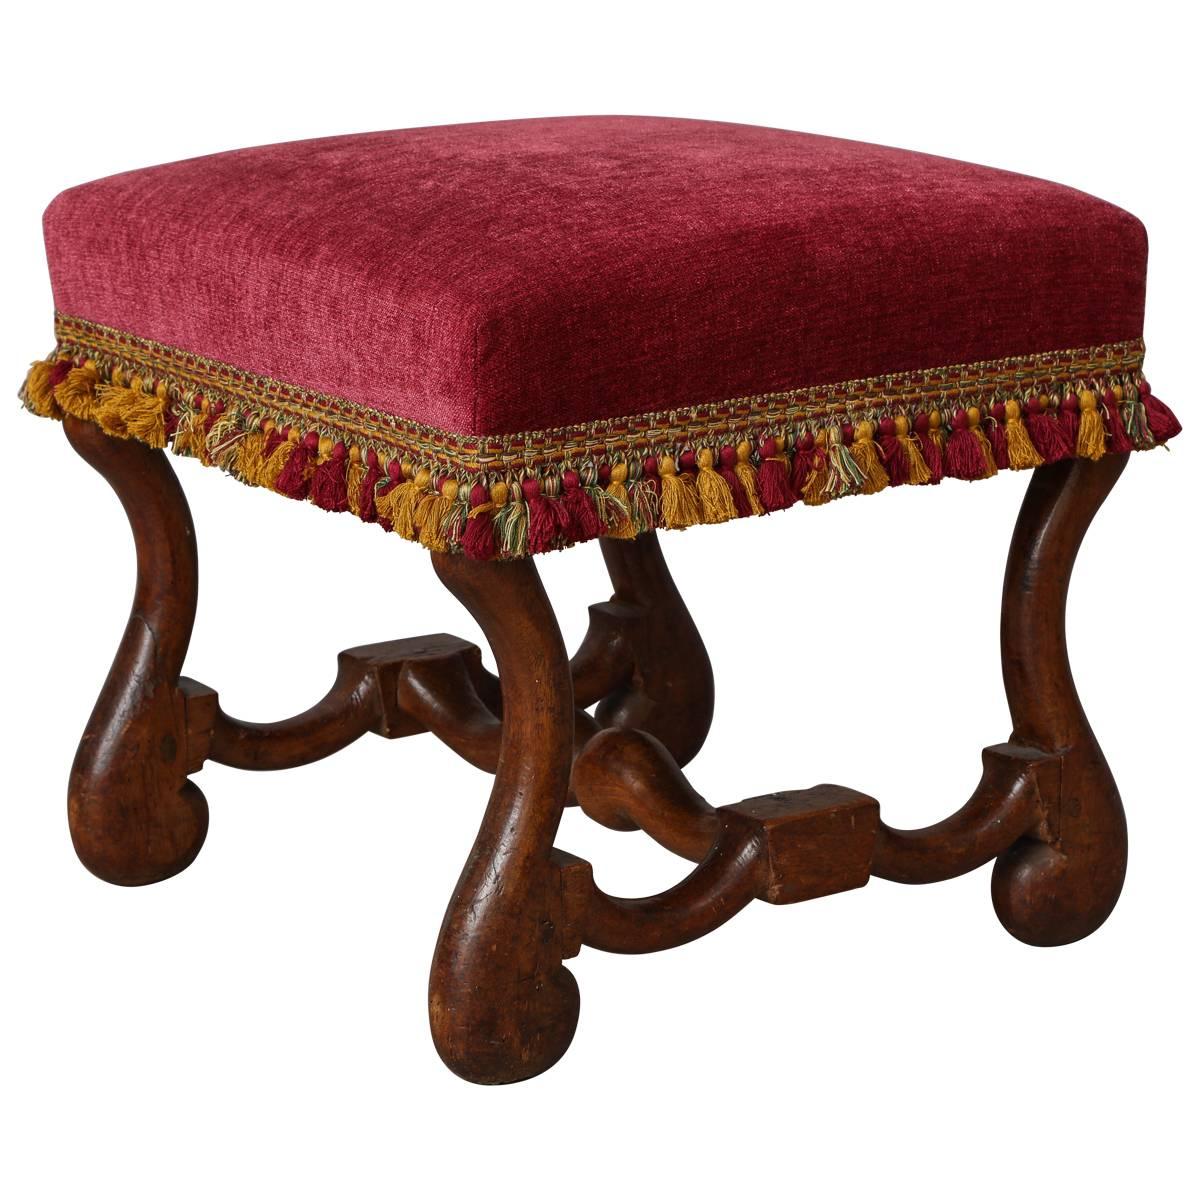 French Louis XIII Period Walnut Bench with ‘Os De Mouton’ Legs